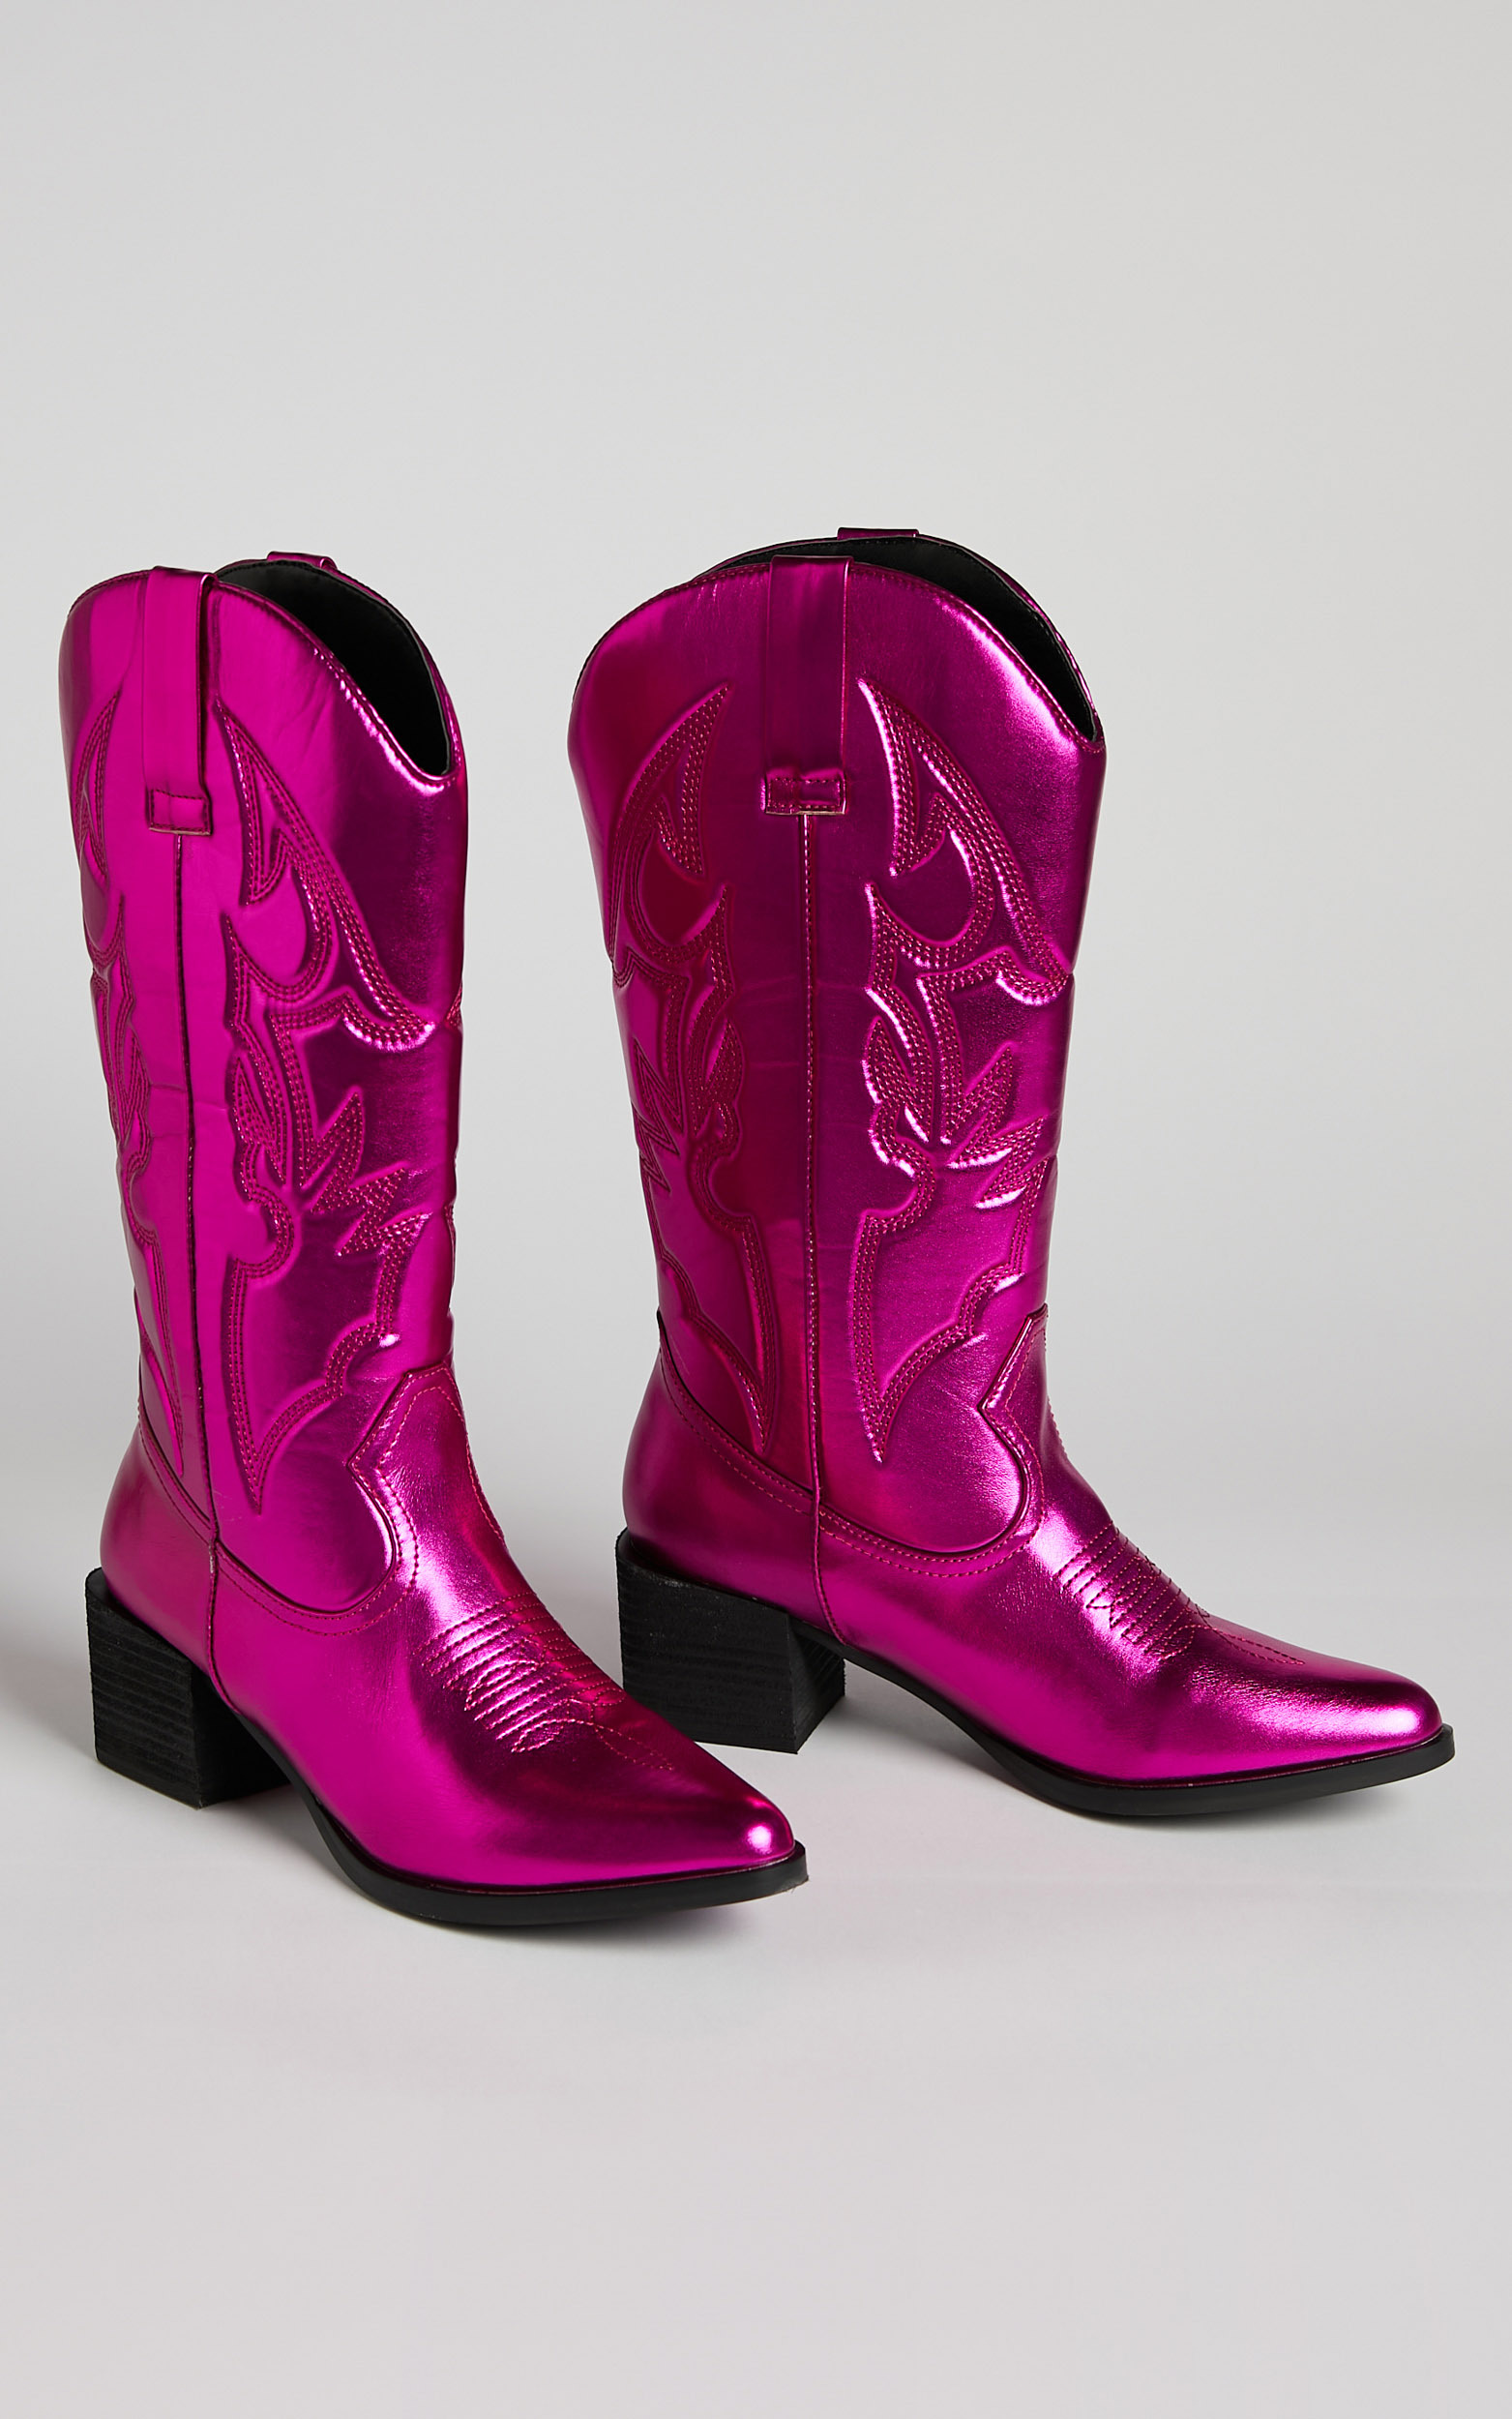 Therapy - Ranger Boots in Pink Metallic - 06, PNK1, hi-res image number null